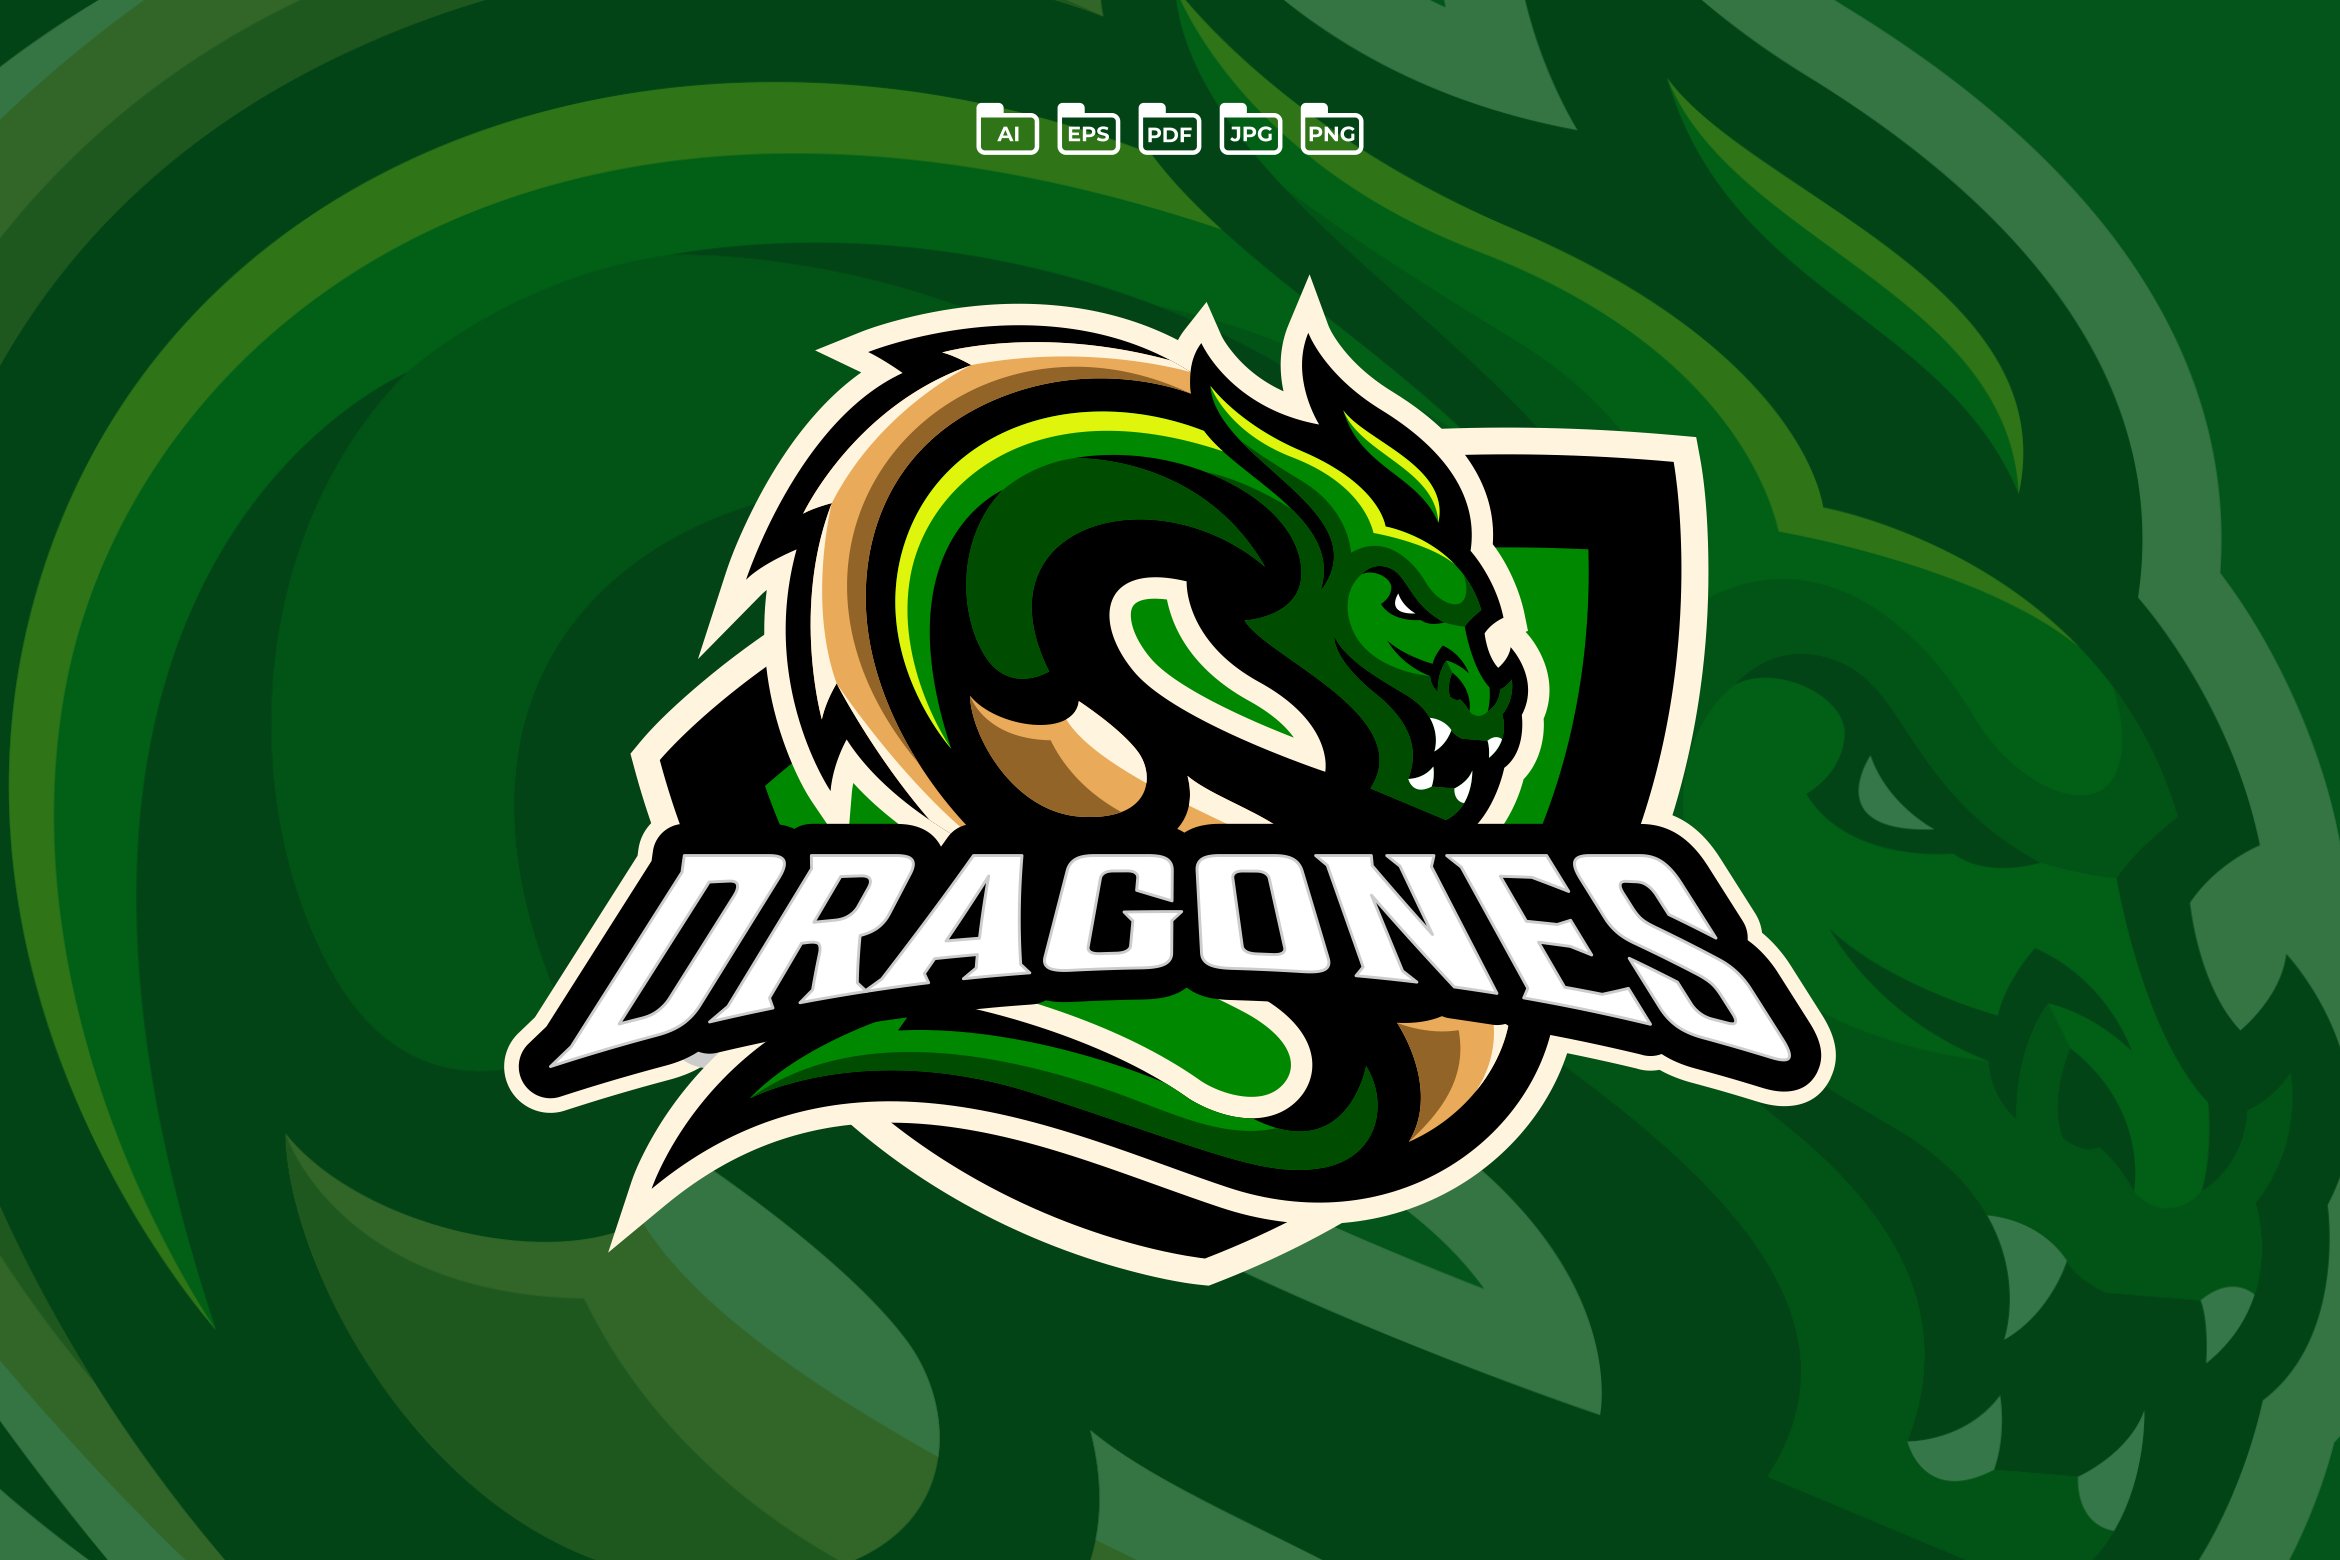 Awesome Dragon Logo Template cover image.